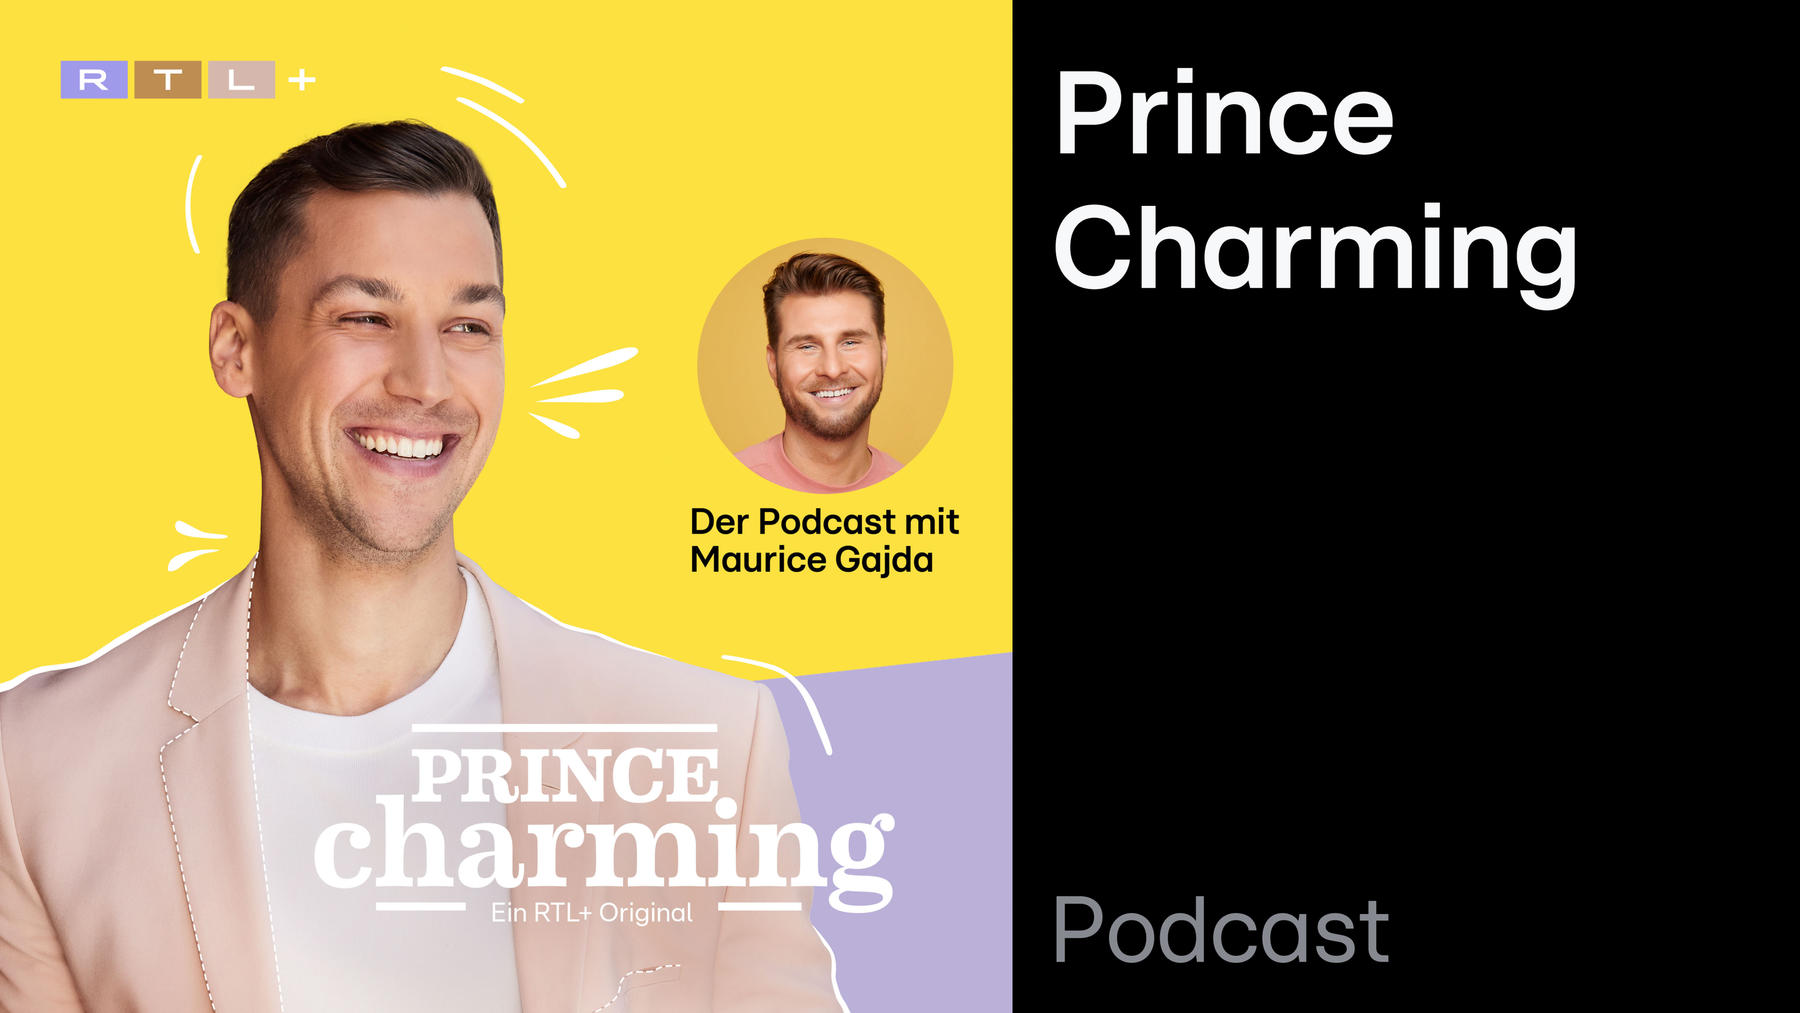 Podcast: Prince Charming